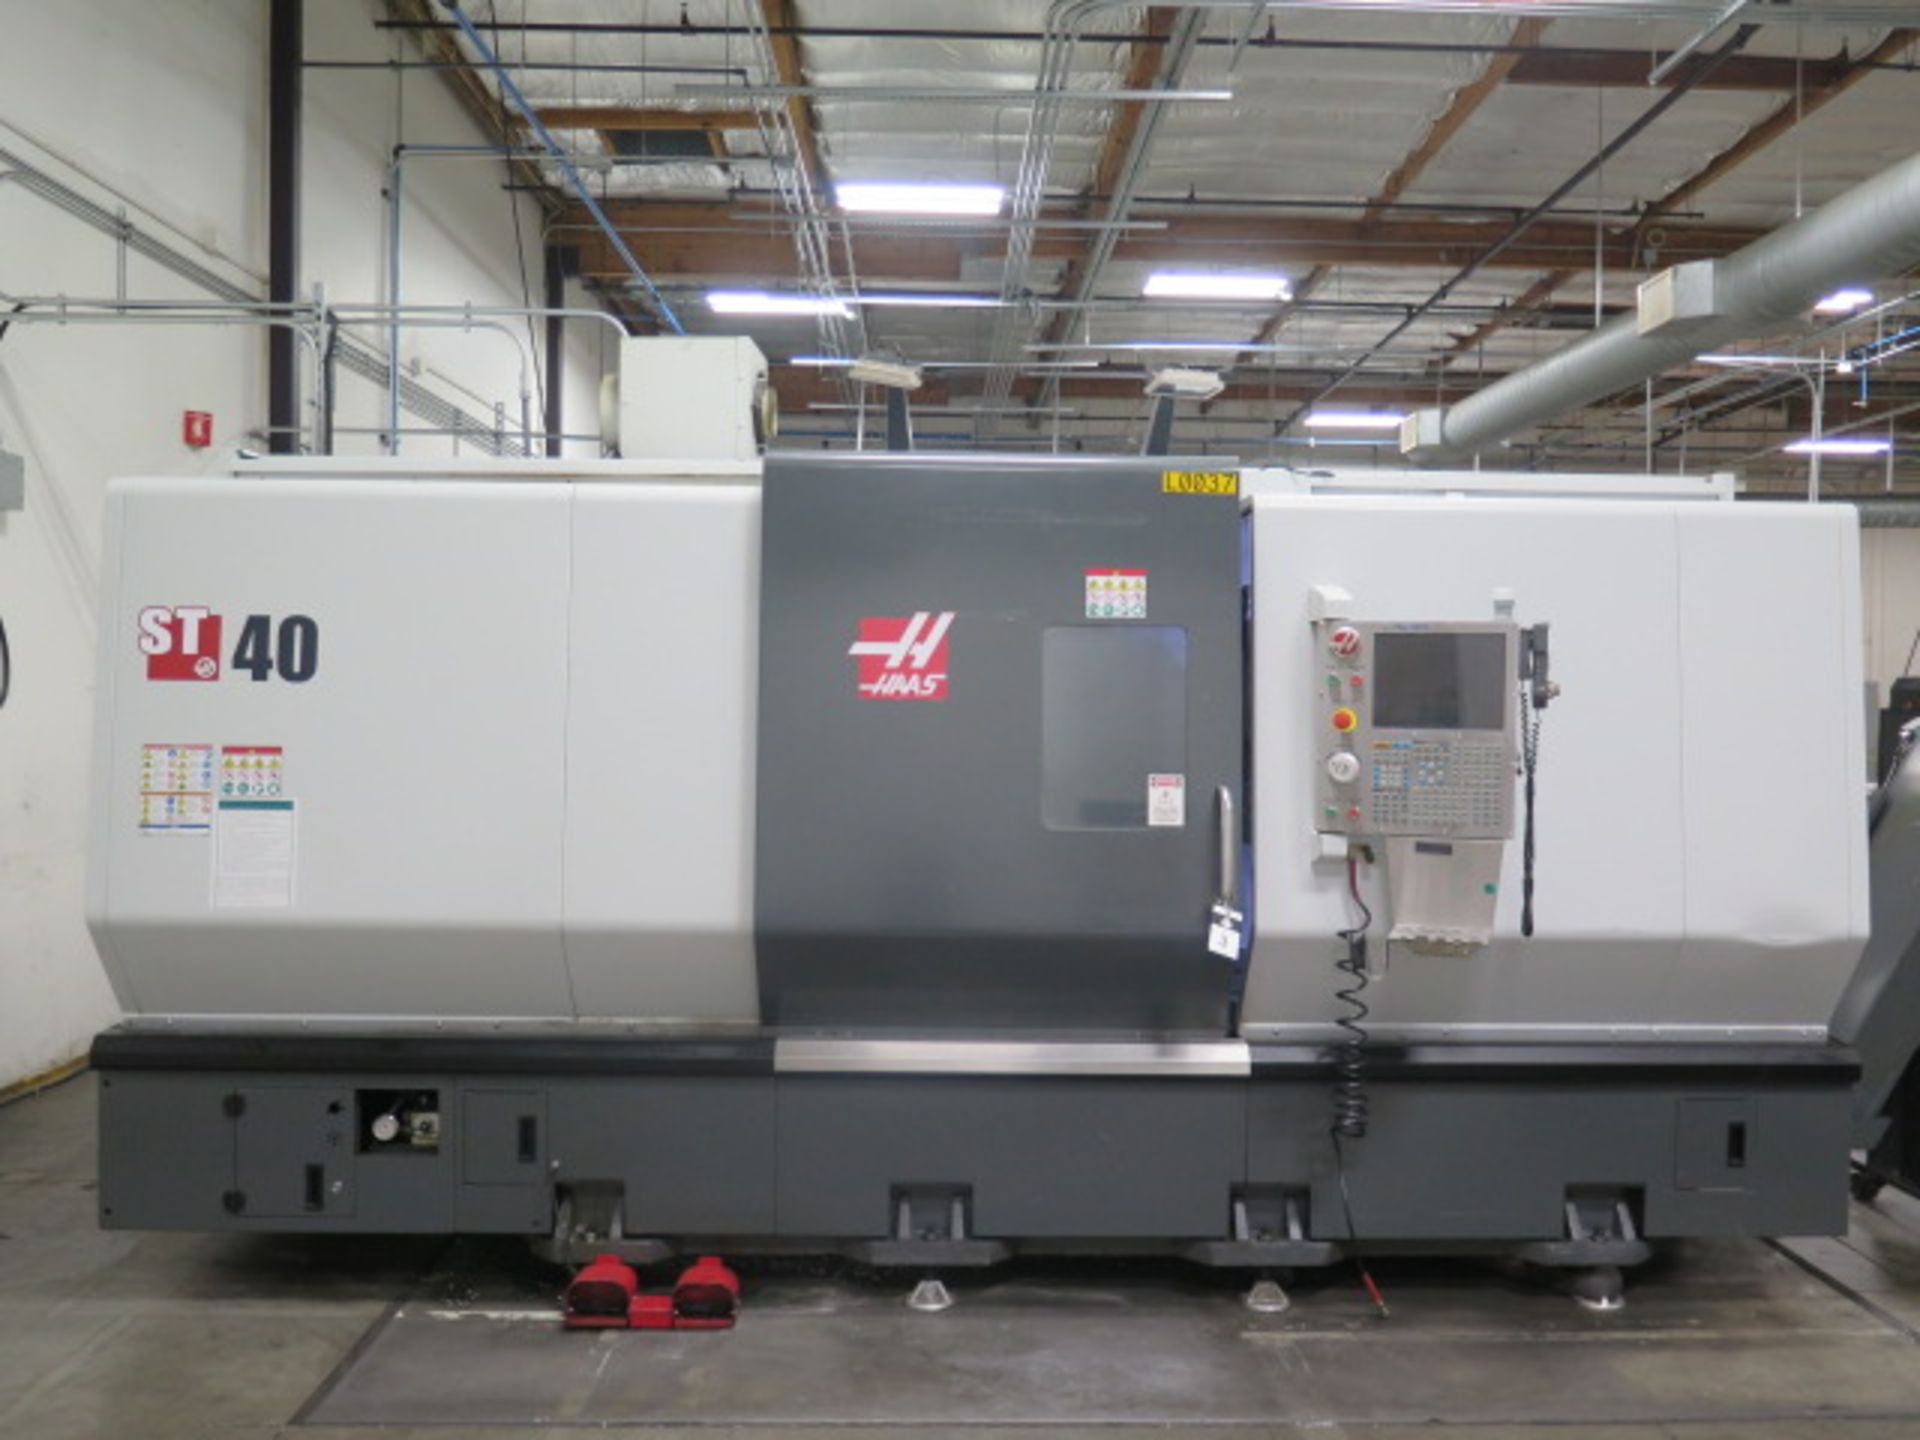 State of The Art” Mazak & Haas Semi Conductor MFG Facility - Image 7 of 8